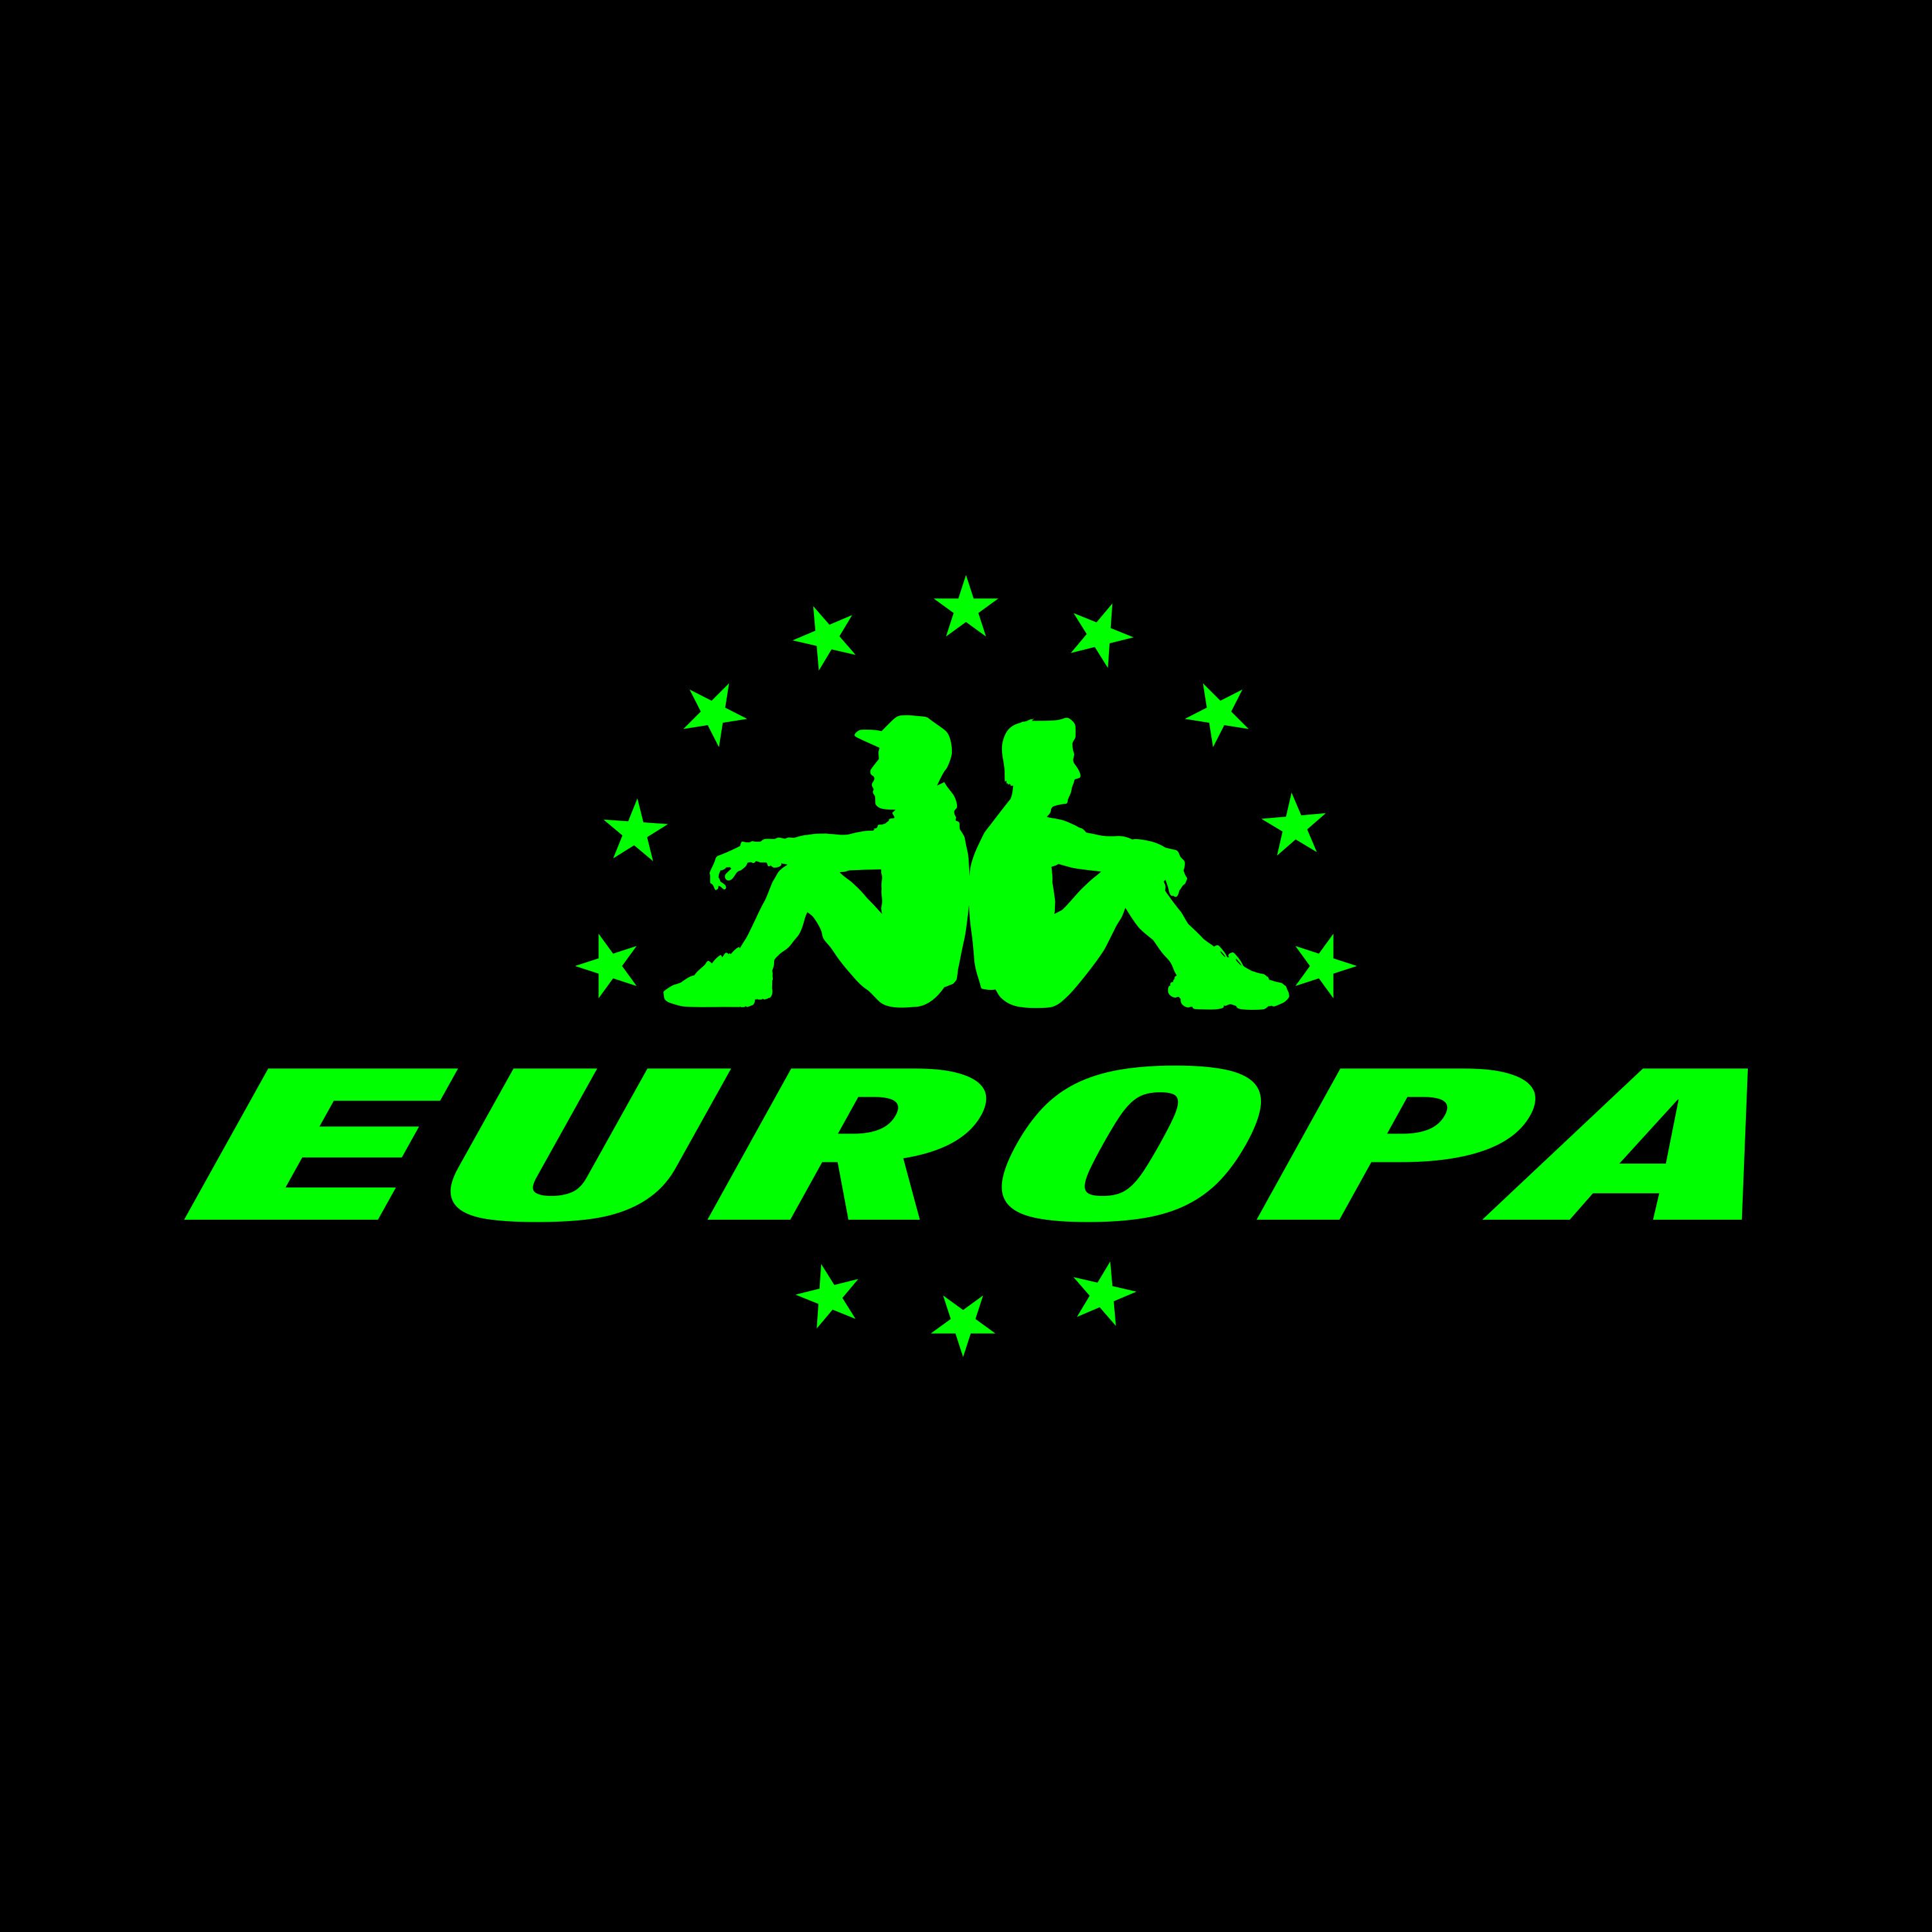 Europa, proyecto de Jax Jones y Martin Solveig repite Nº1 con All Day and Night Feat Madison Beer en Maxima 51 Chart